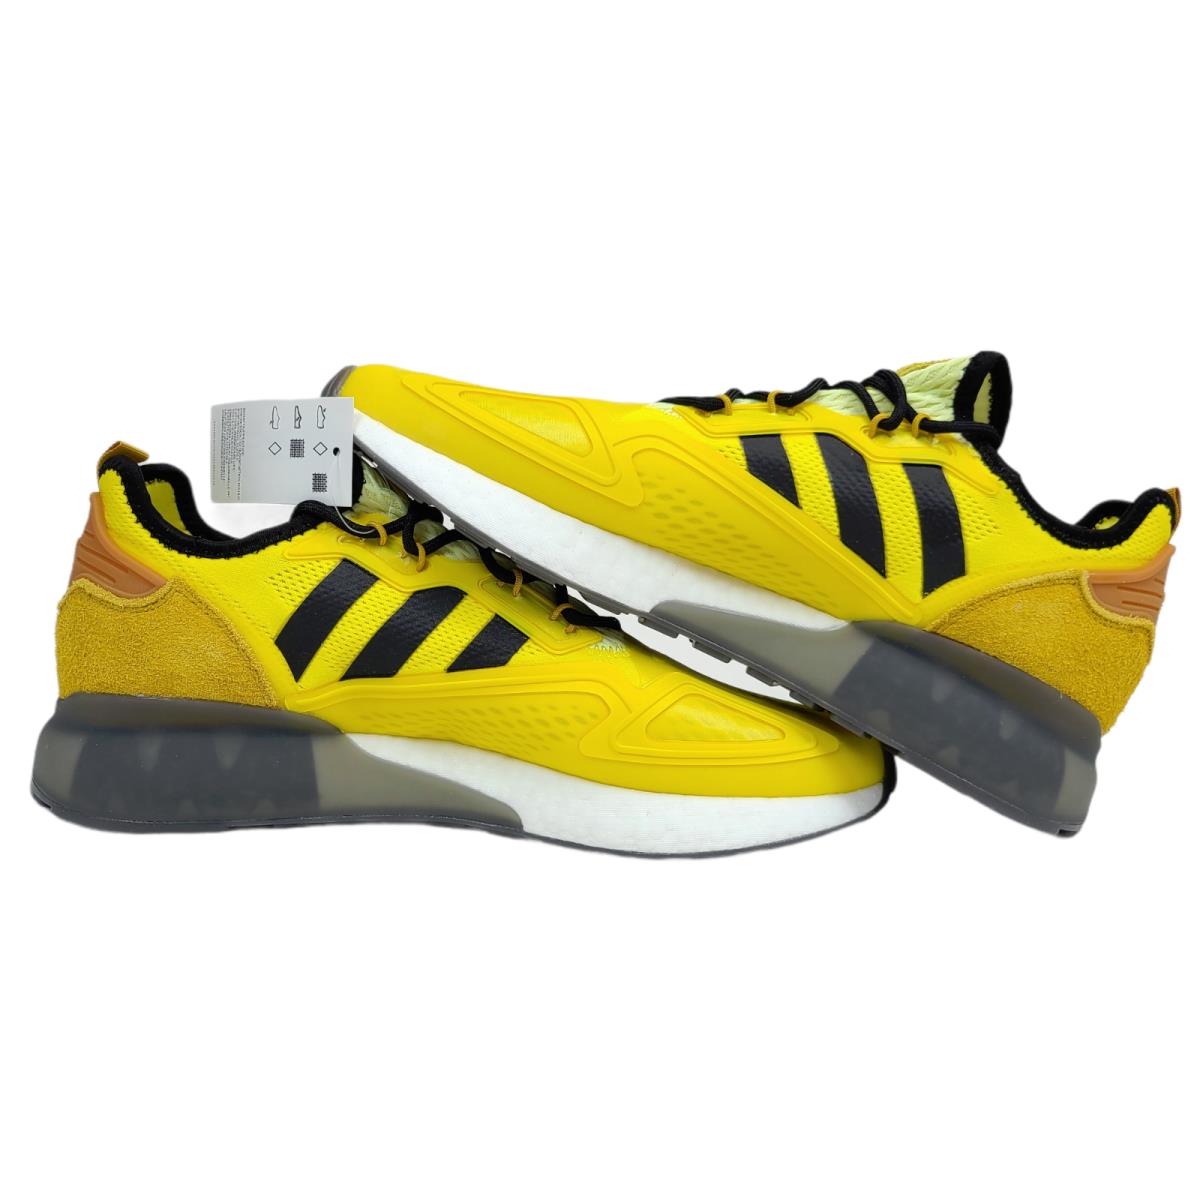 Adidas shoes Boost - Yellow 25